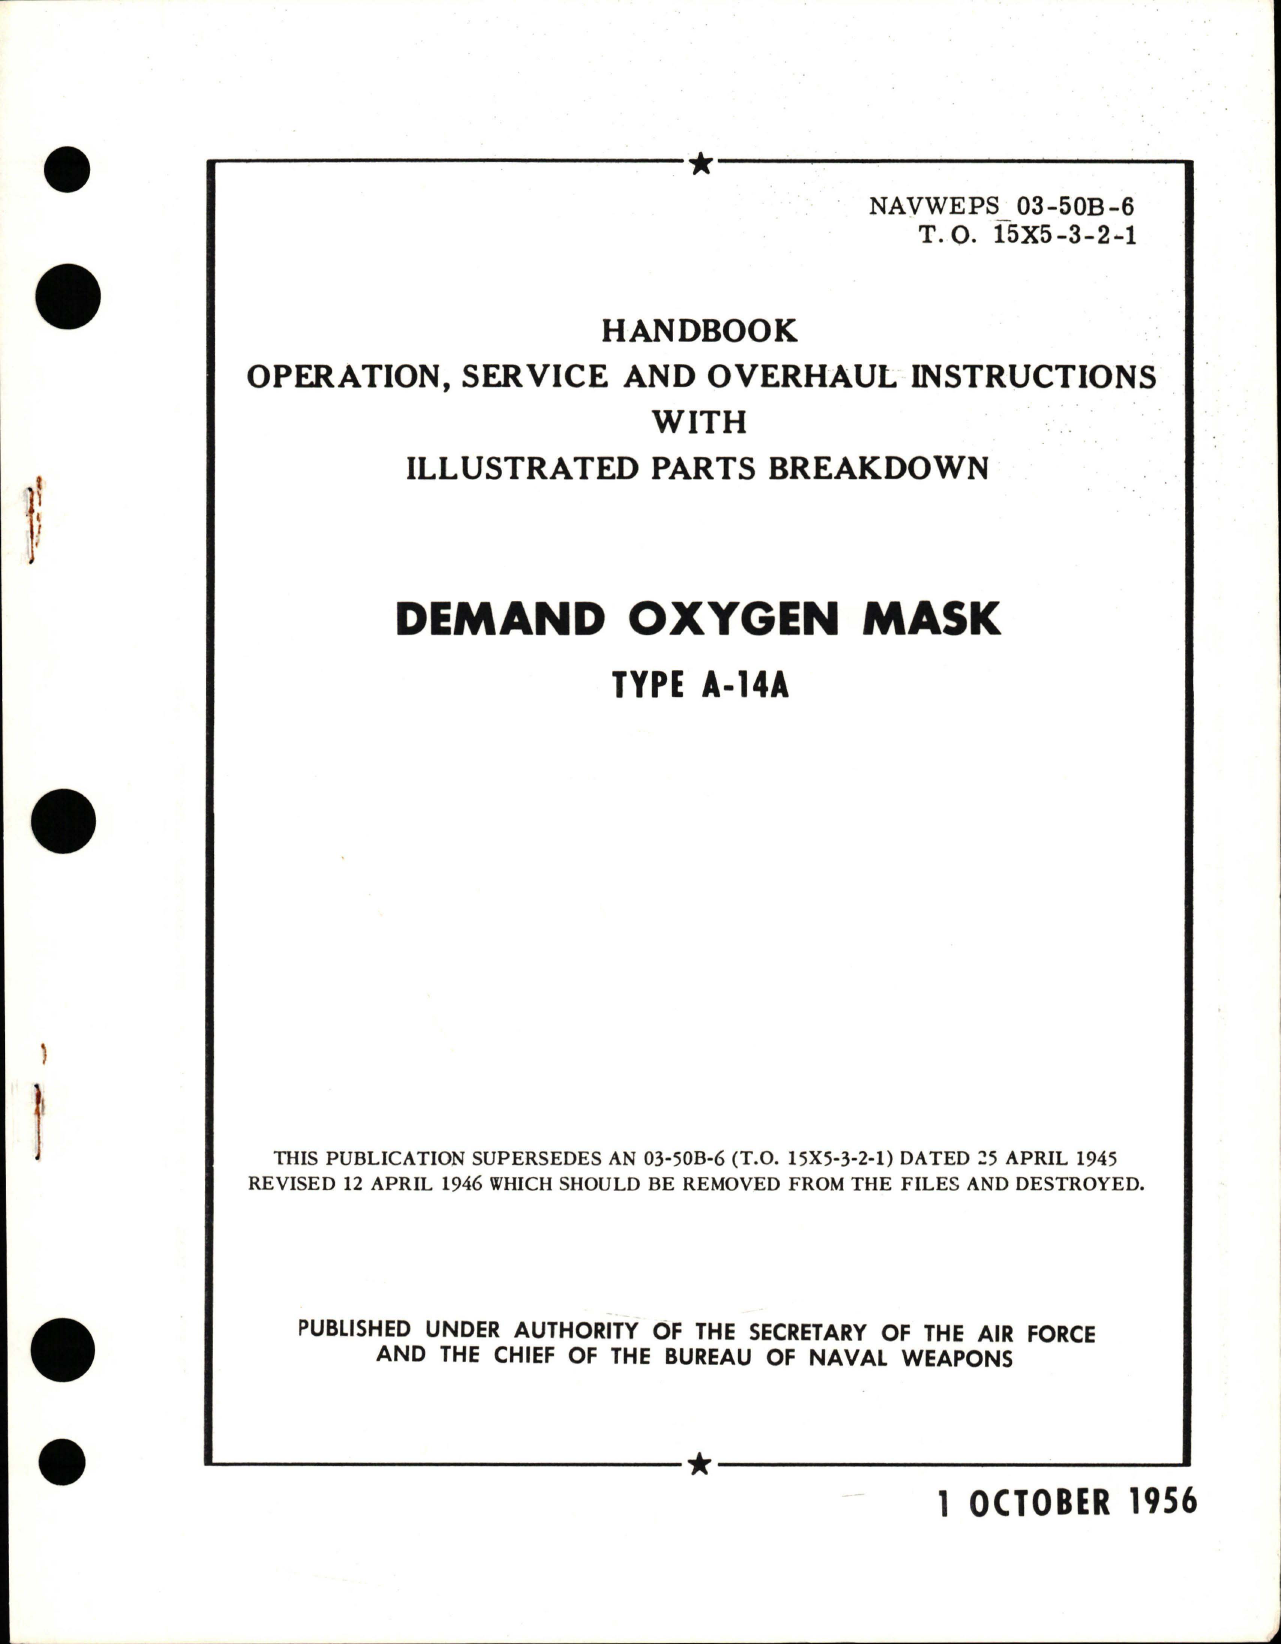 Sample page 1 from AirCorps Library document: Operation, Service and Overhaul Instructions with Illustrated Parts Breakdown for Demand Oxygen Mask - Type A-14A